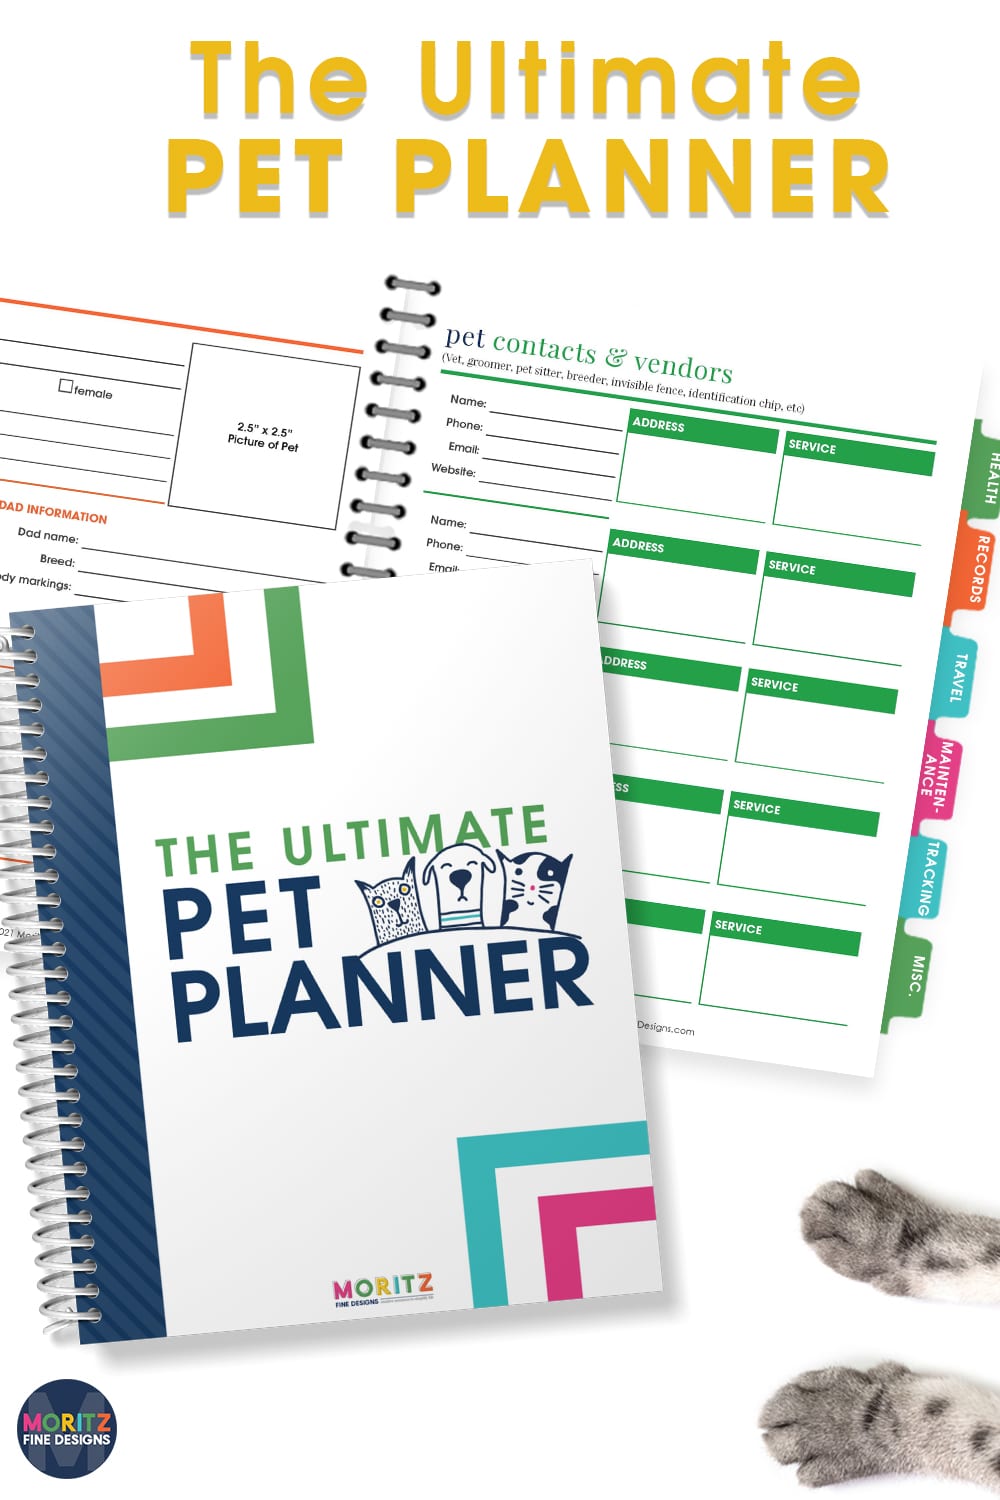 The sanity-saving Ultimate Pet Planner is designed to help you plan, track and monitor your pet's needs to help ensure a happy life!